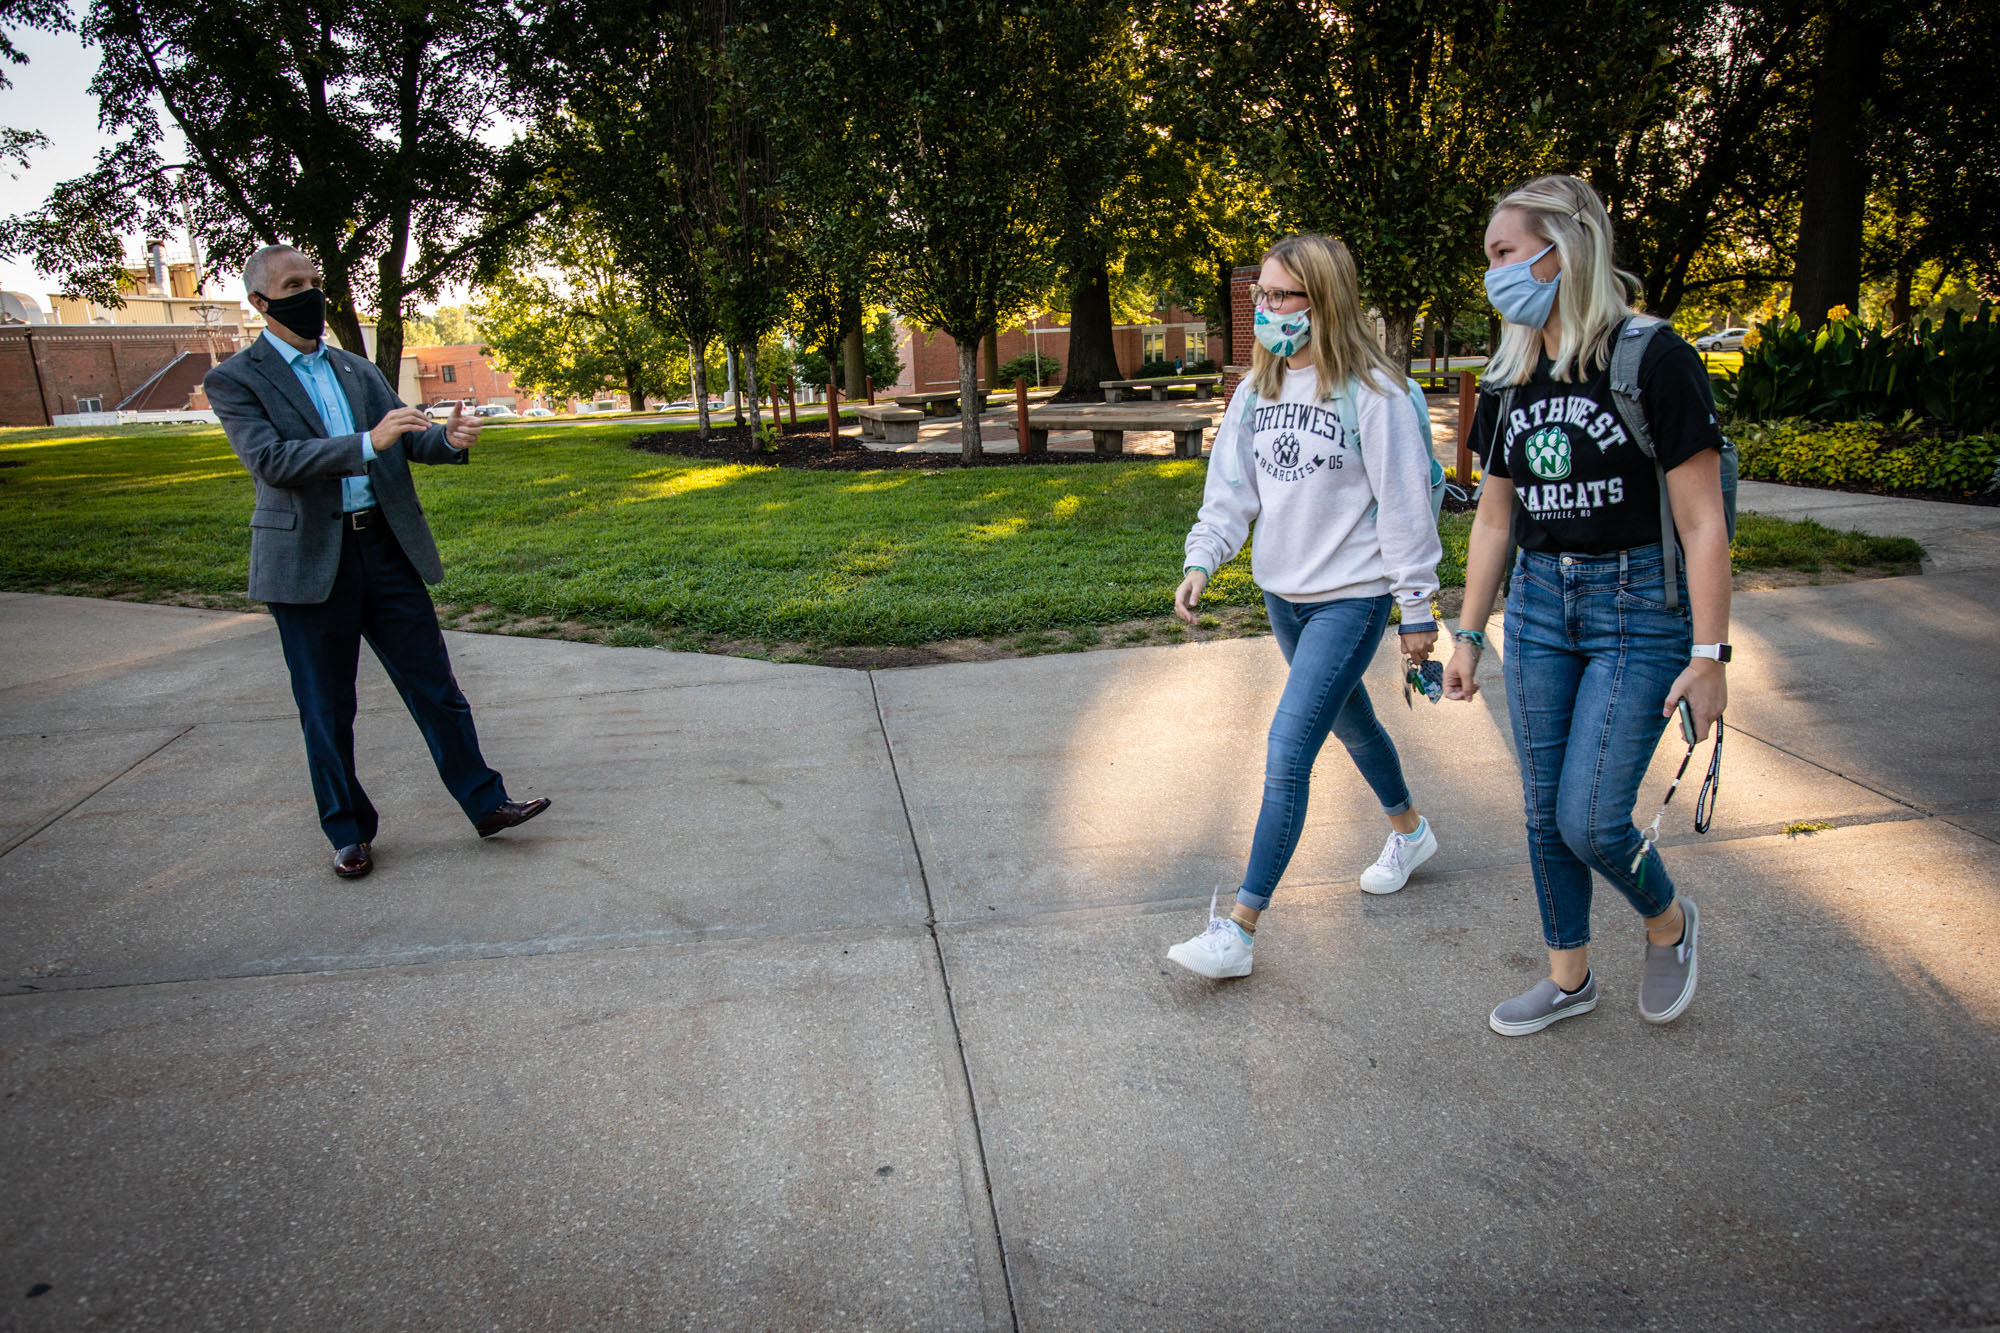 Northwest President Dr. John Jasinski greeted students as they walked across campus on their first day of classes Aug. 19. (Photo by Todd Weddle/Northwest Missouri State University)